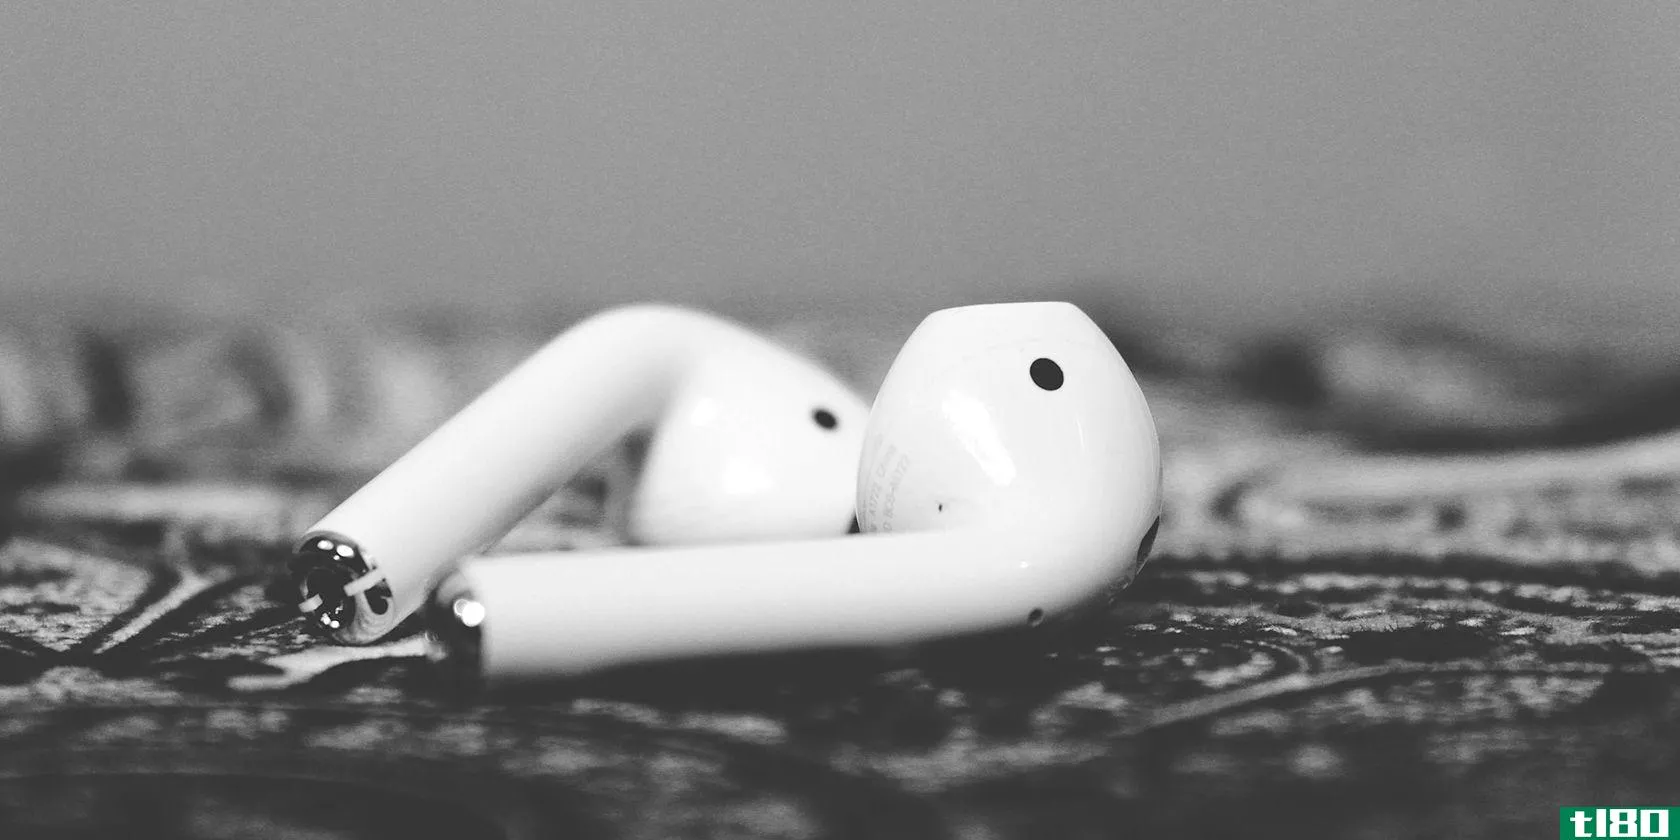 How to Change Your AirPods' Name